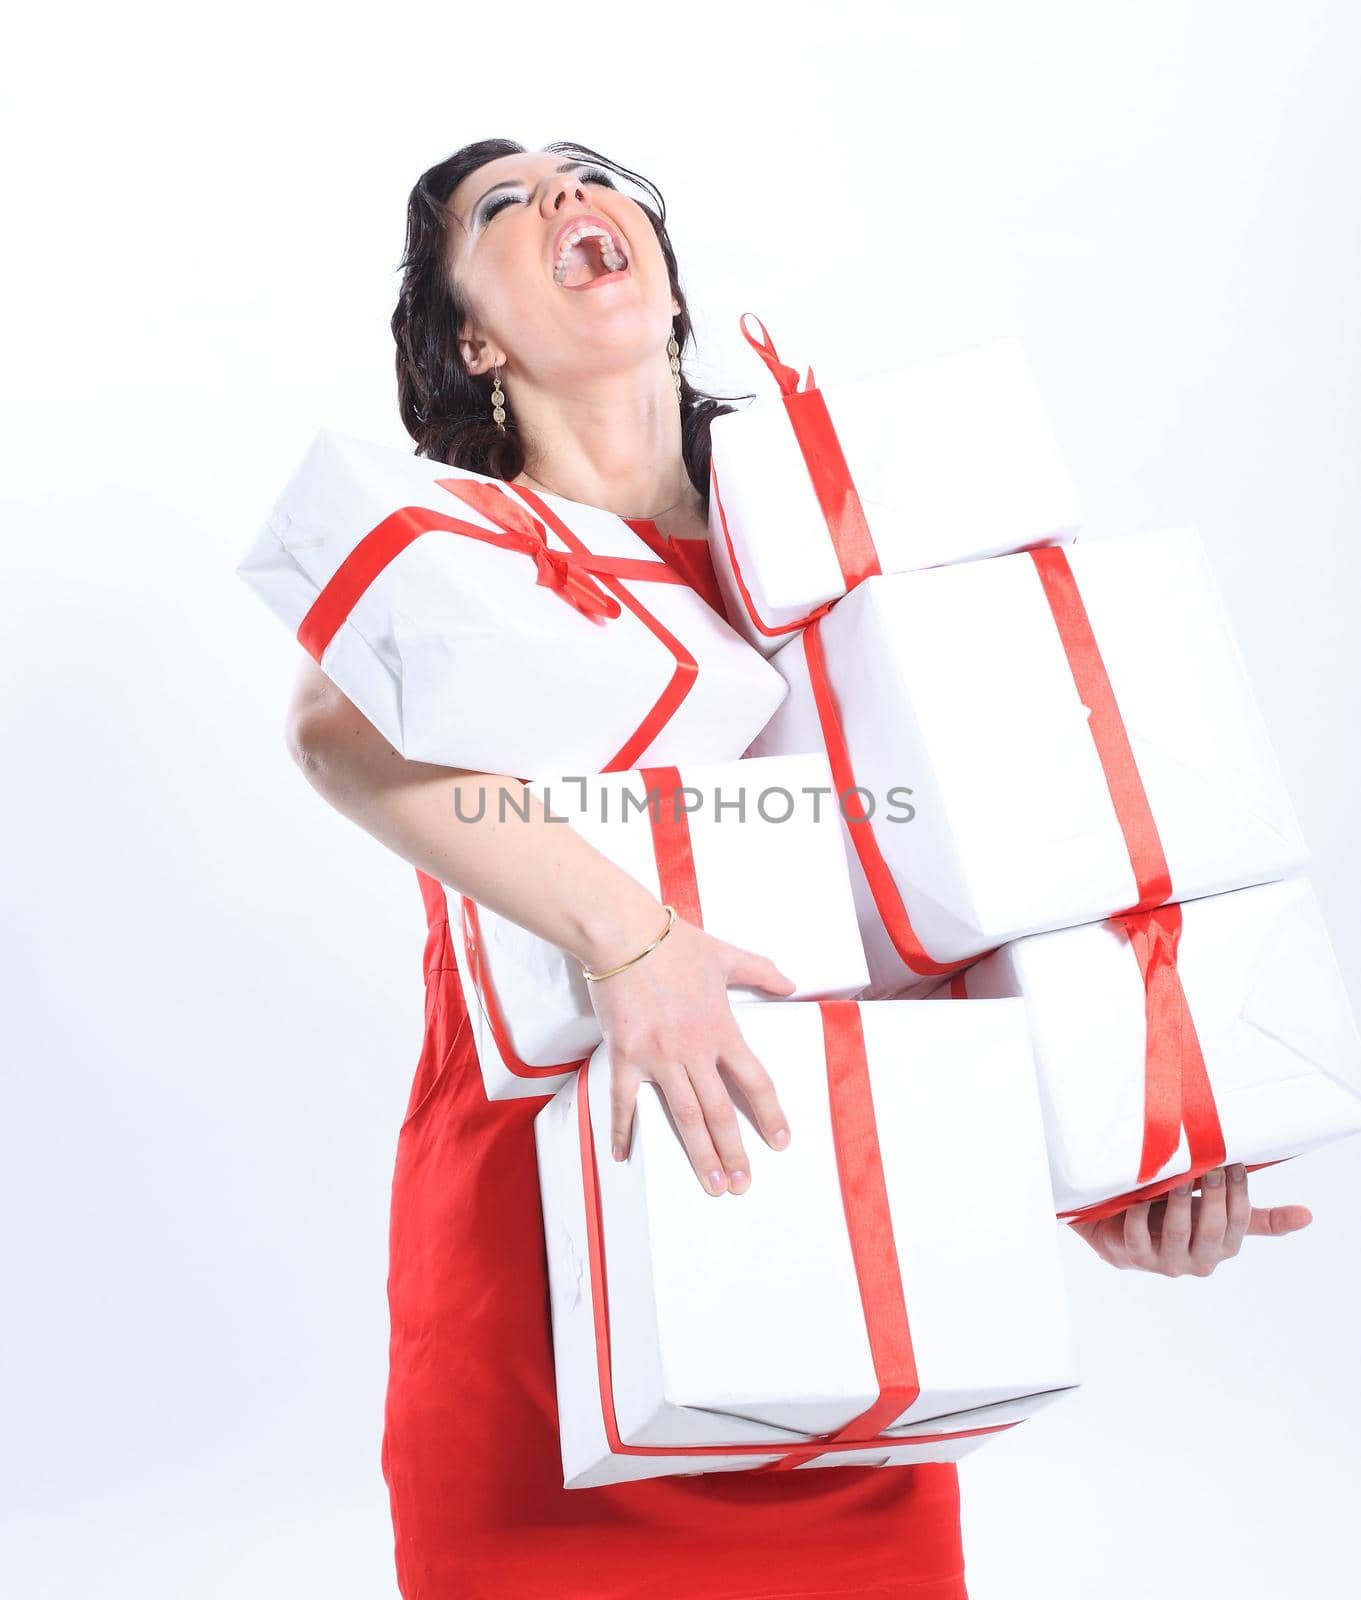 happy woman with gift boxes.photo with copy space.